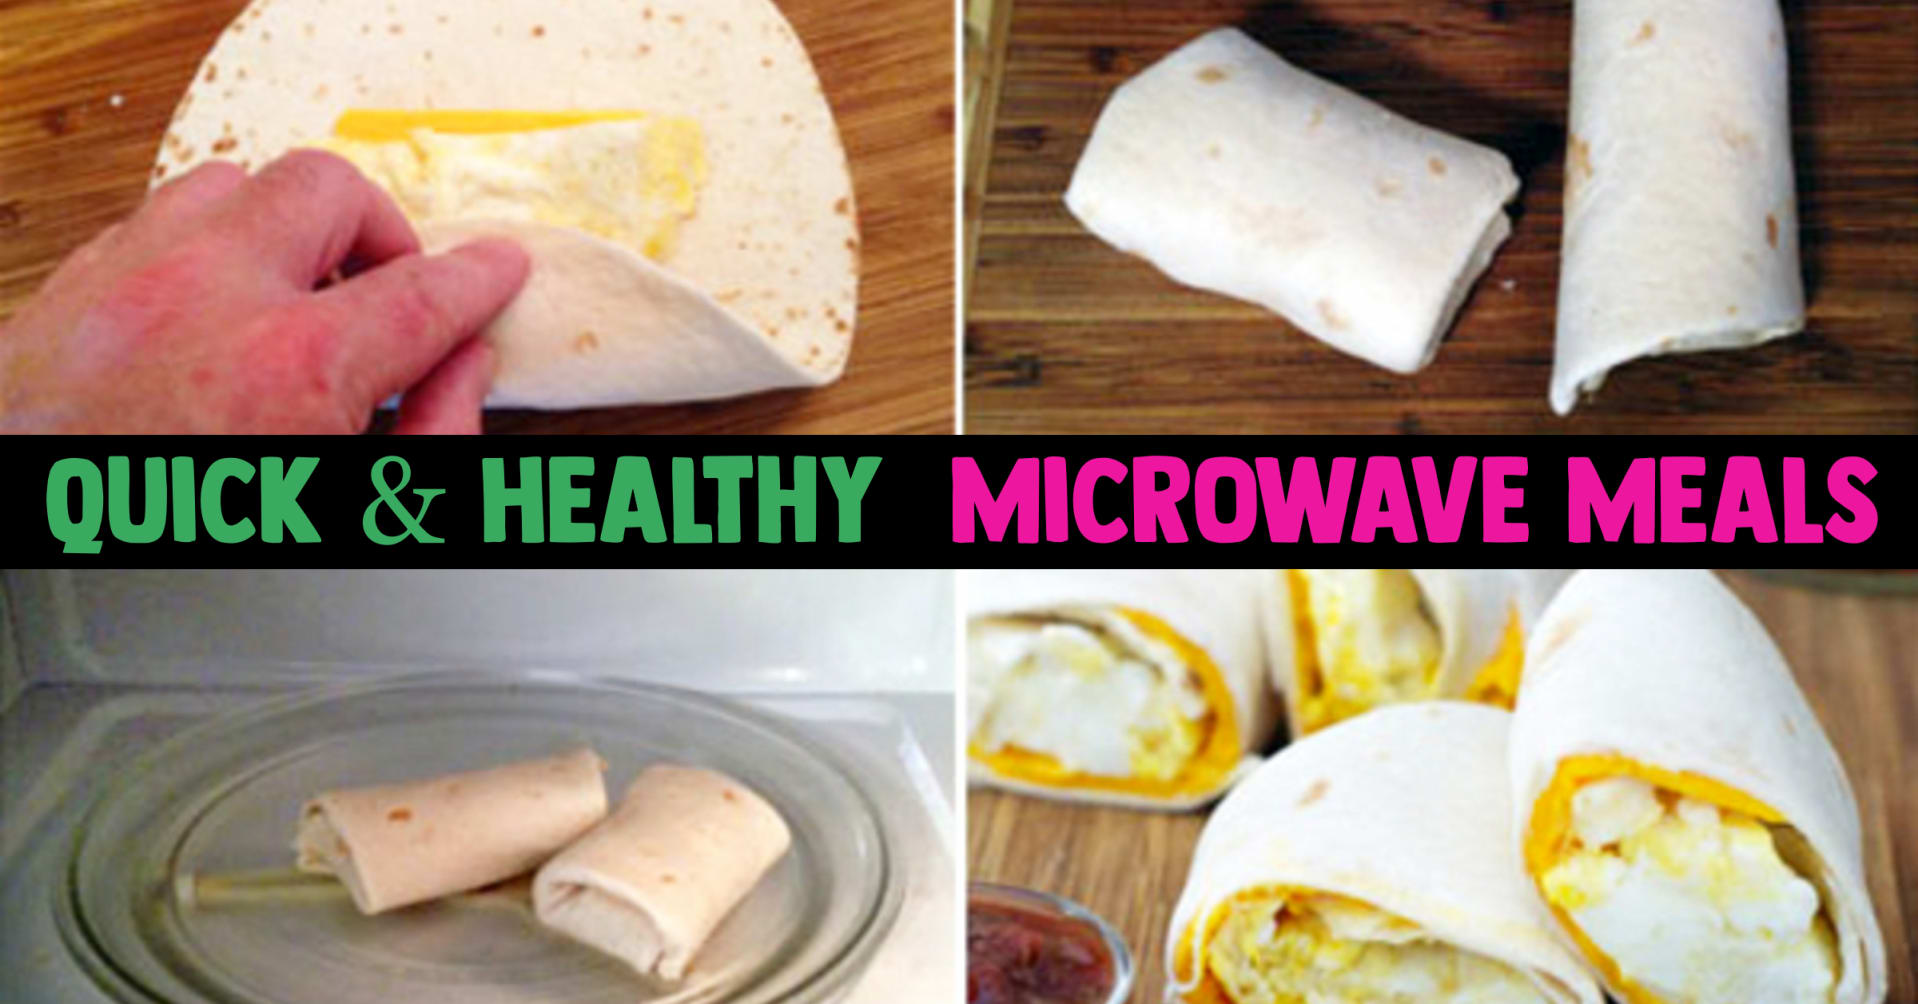 Healthy Microwave Meals - skip frozen microwave meals, make a HEALTHY meal in your microwave even if you're cooking for one.  Healthy microwave dinner meals, breakfast mornings meals, 3 ingredients and more quick and easy and HEALTHY microwave meals